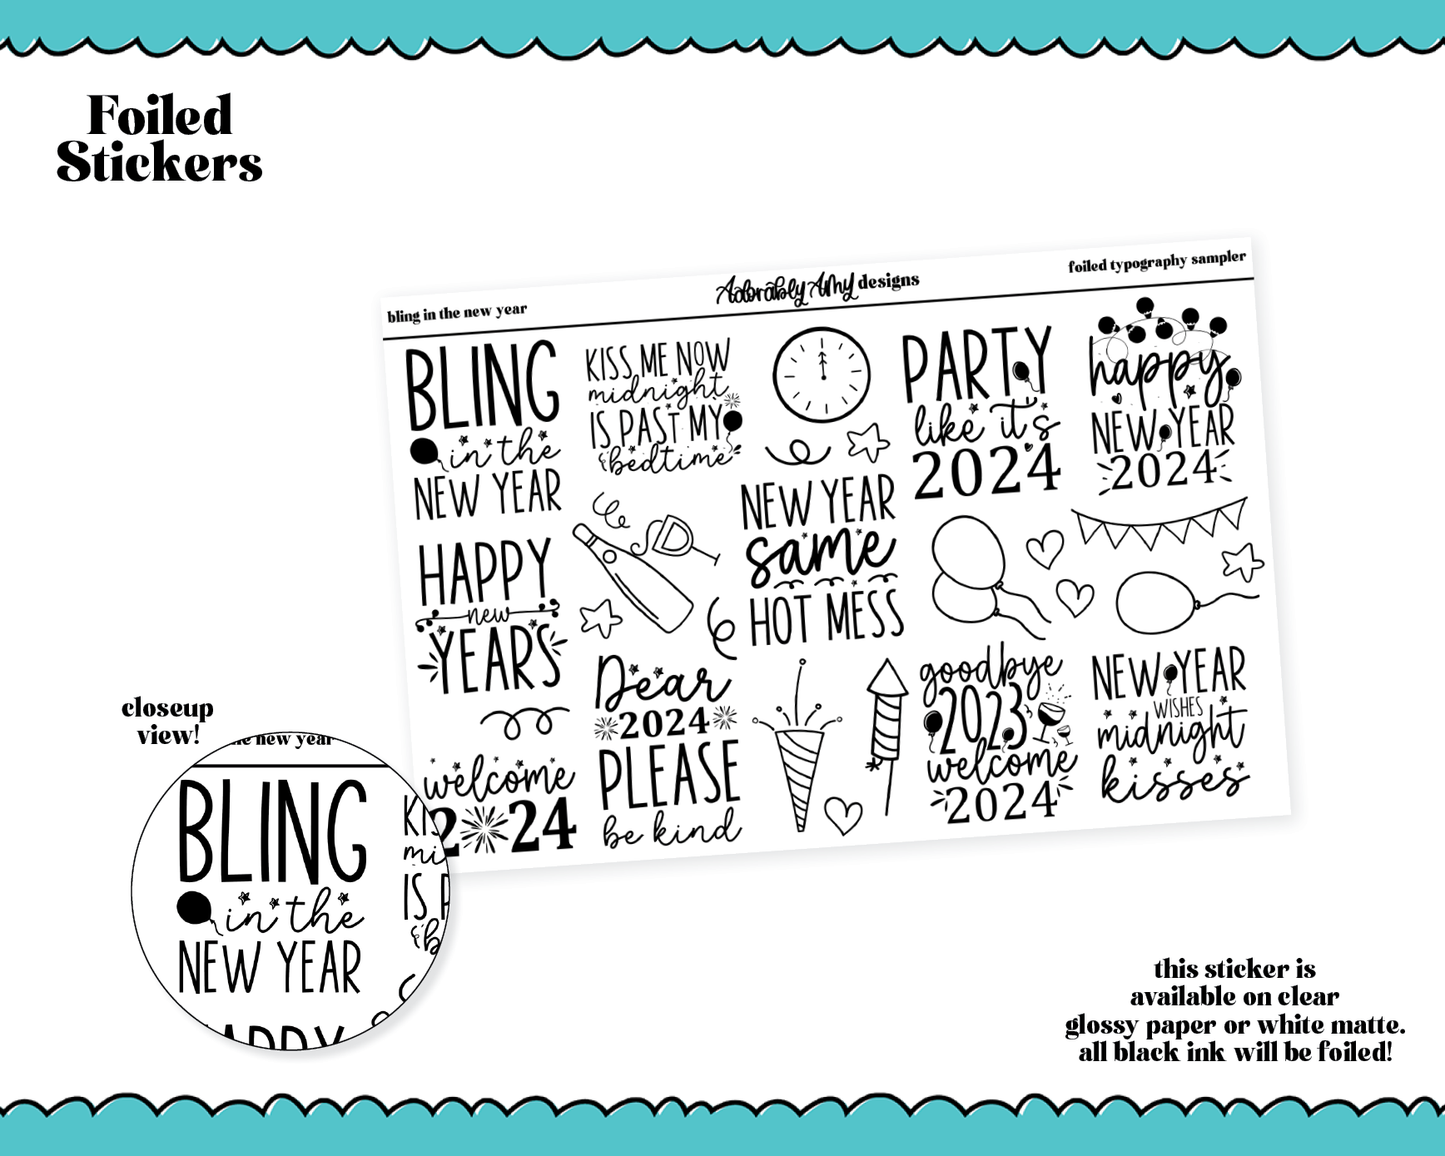 Foiled Bling in the New Year Typography Sampler Planner Stickers for any Planner or Insert